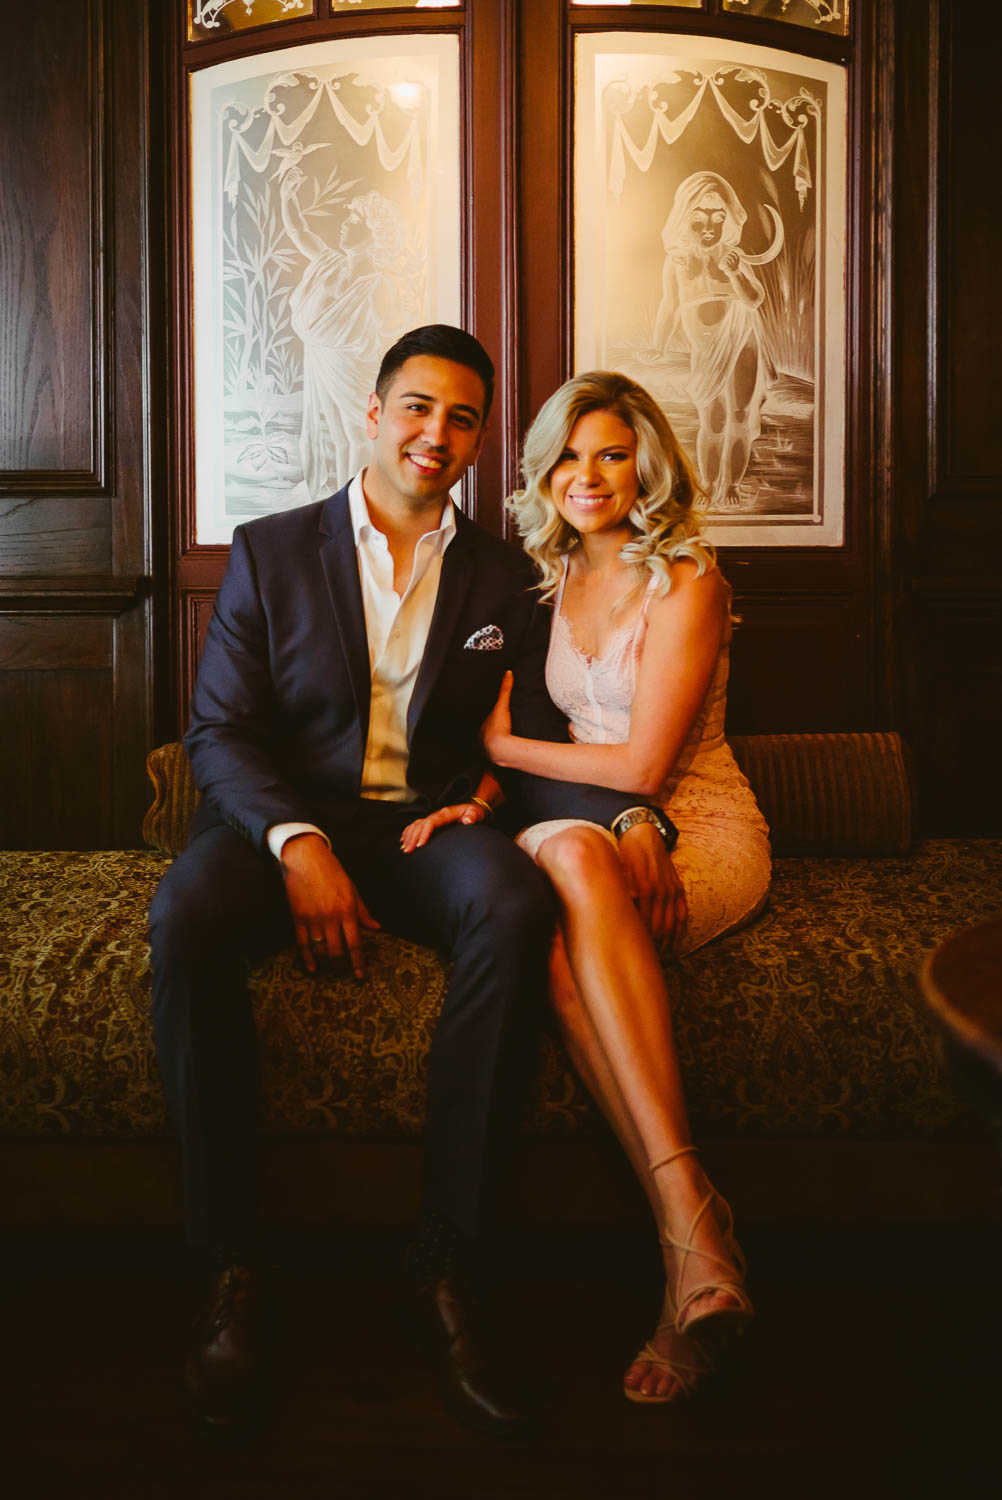 Bohanans engagement shoot in San Antonio Texas shows couple sitting together